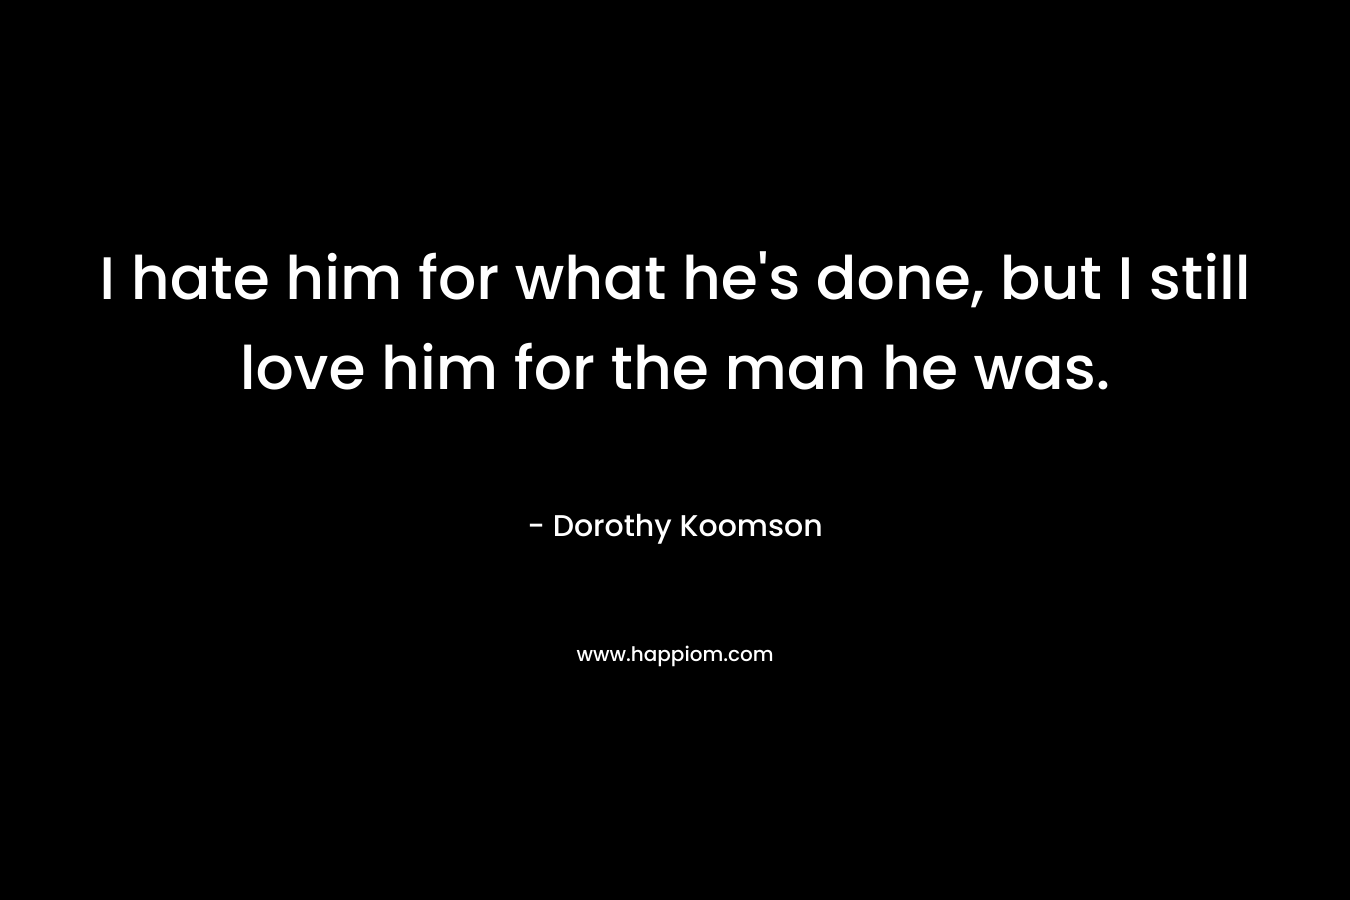 I hate him for what he’s done, but I still love him for the man he was. – Dorothy Koomson